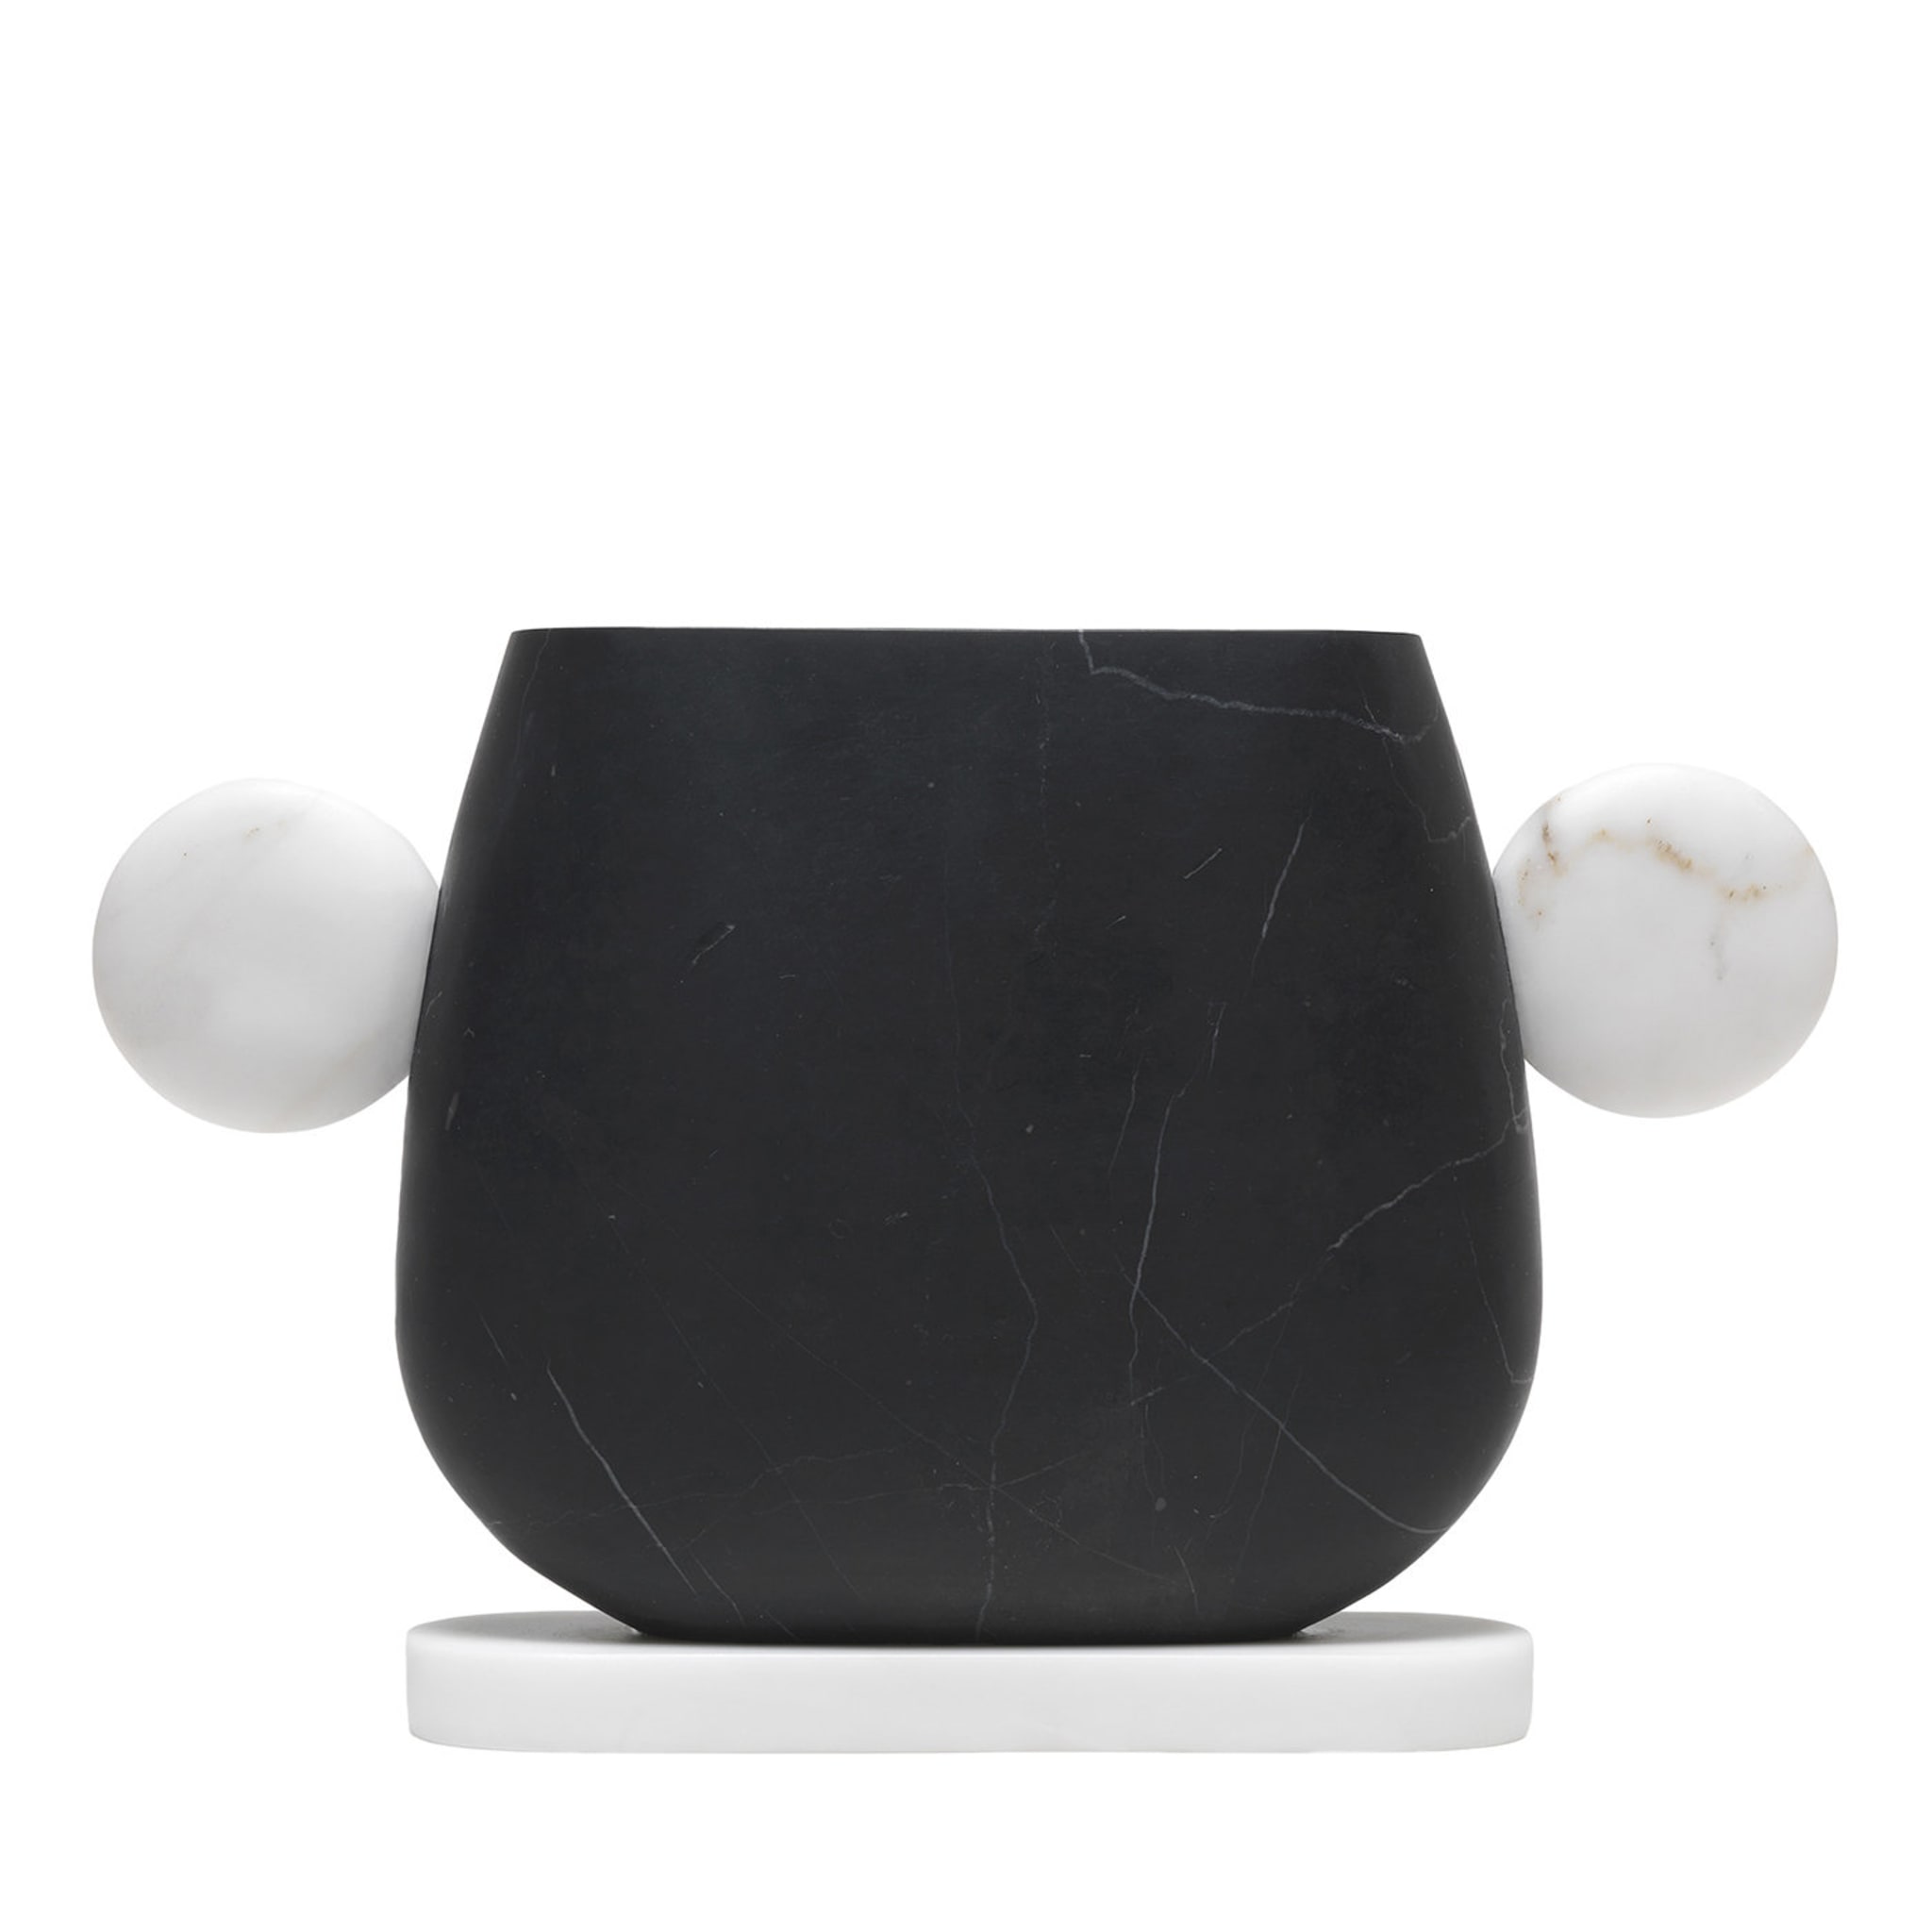 Tacca Black Marquina/White Michelangelo Vase by Matteo Cibic #2 - Main view